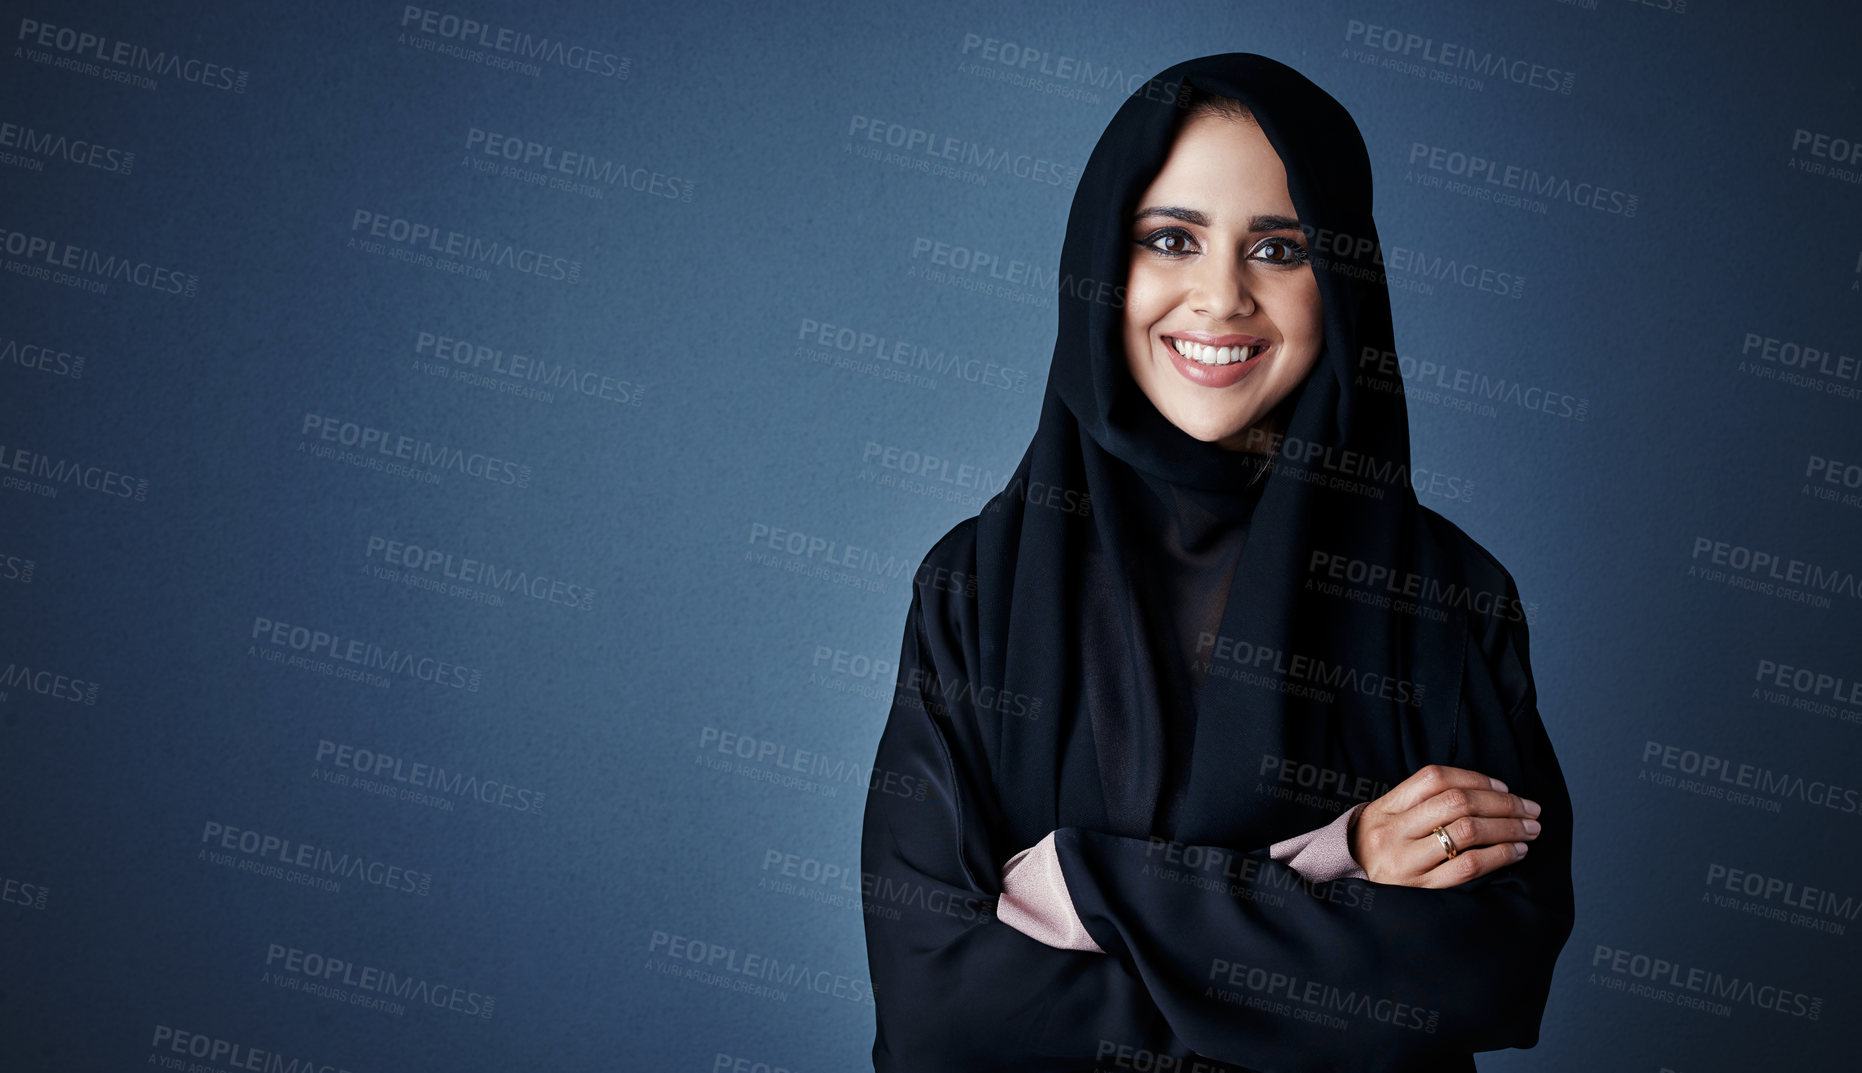 Buy stock photo Cropped portrait of an attractive young businesswoman standing with her arms folded against a dark background